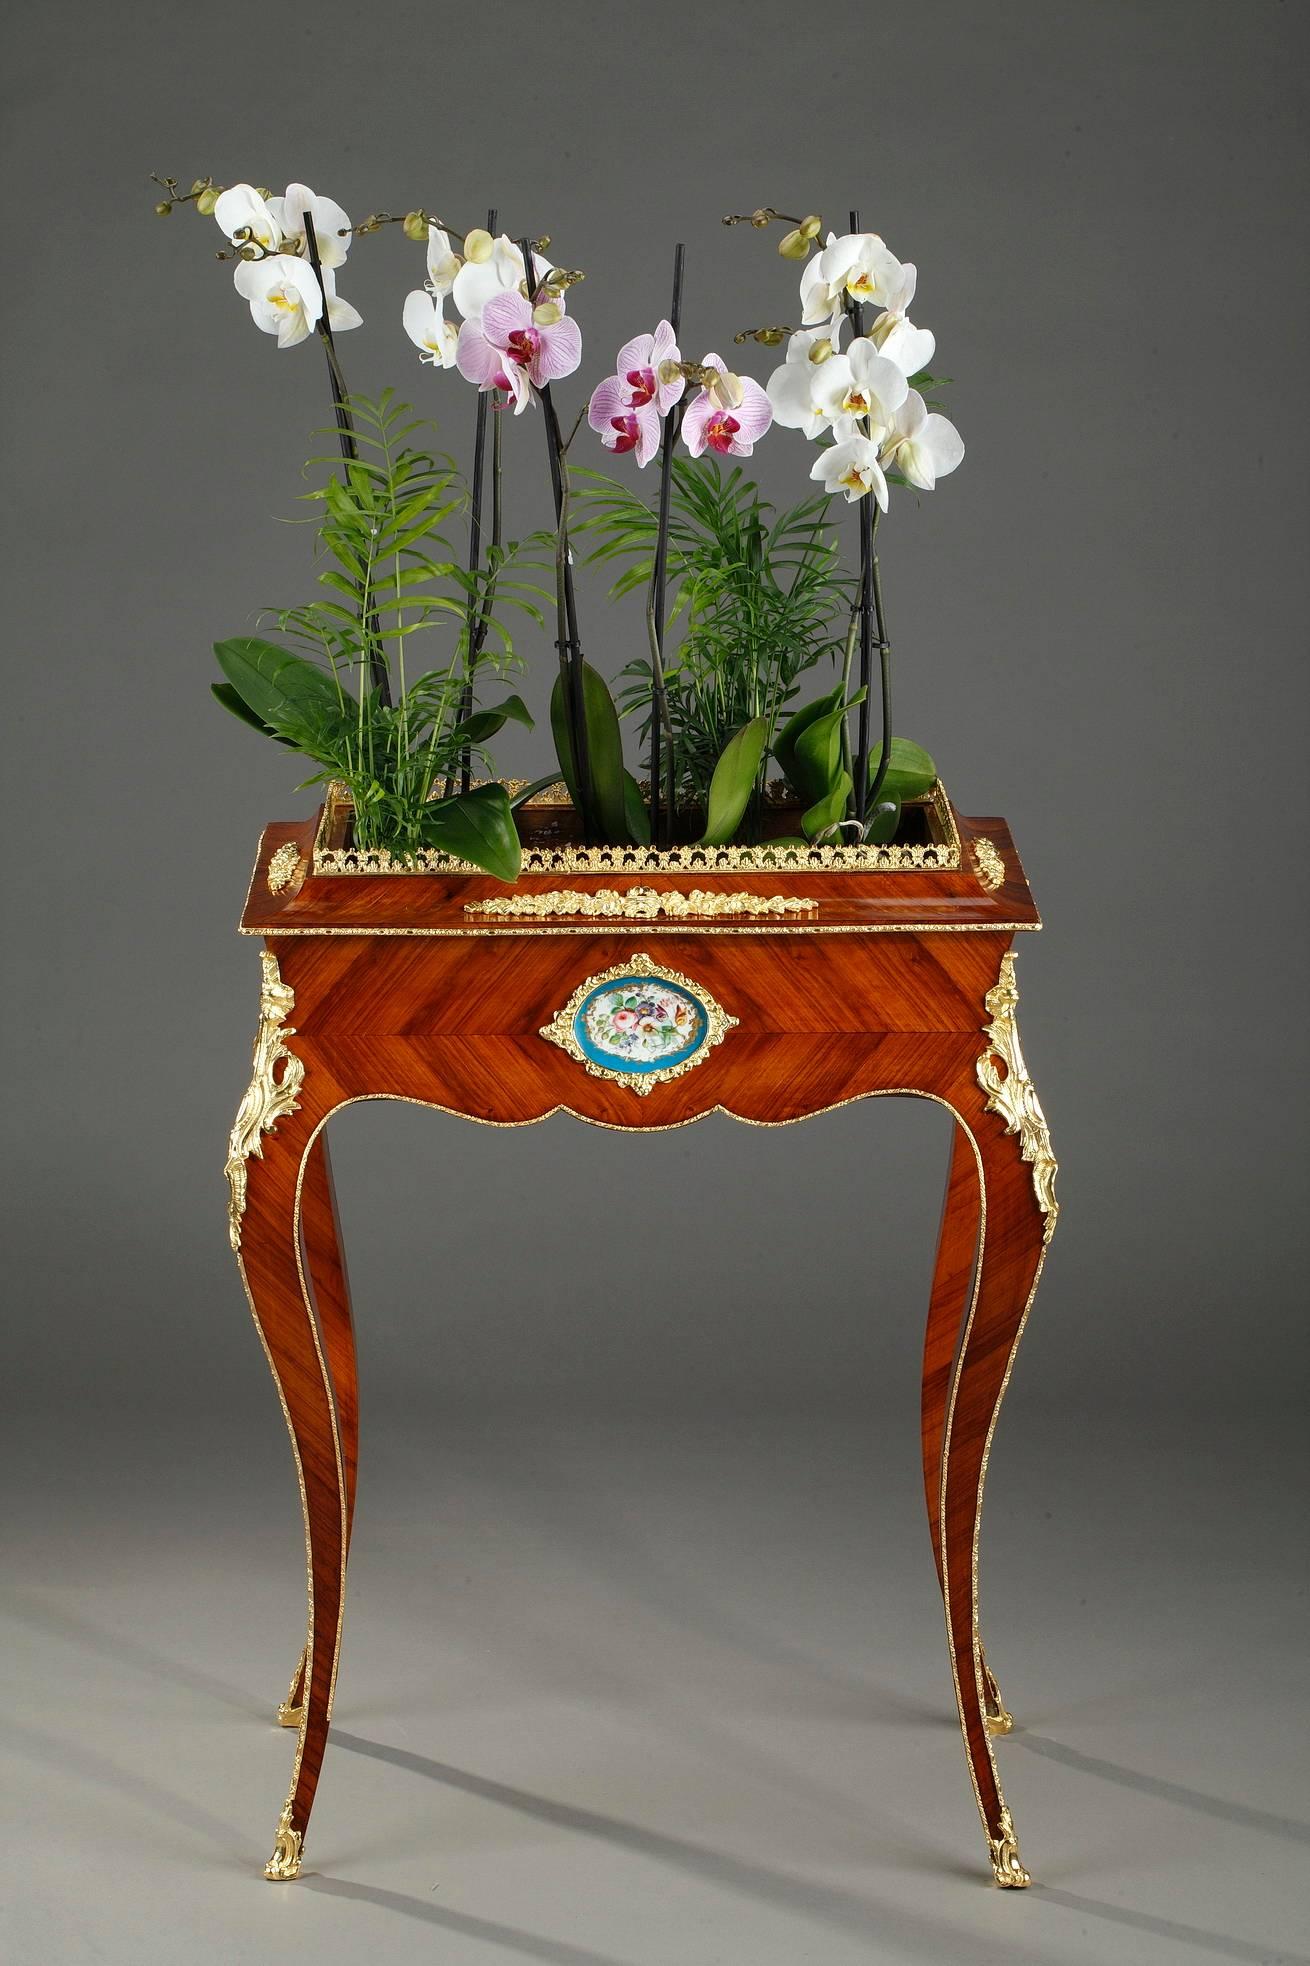 Late 19th century large jardiniere in Louis XV style with curved body and elegant cabriole foliated legs. It has applied ormolu decorations at all corners and top baluster trim. The jardiniere is accented by two multicolored porcelain plates